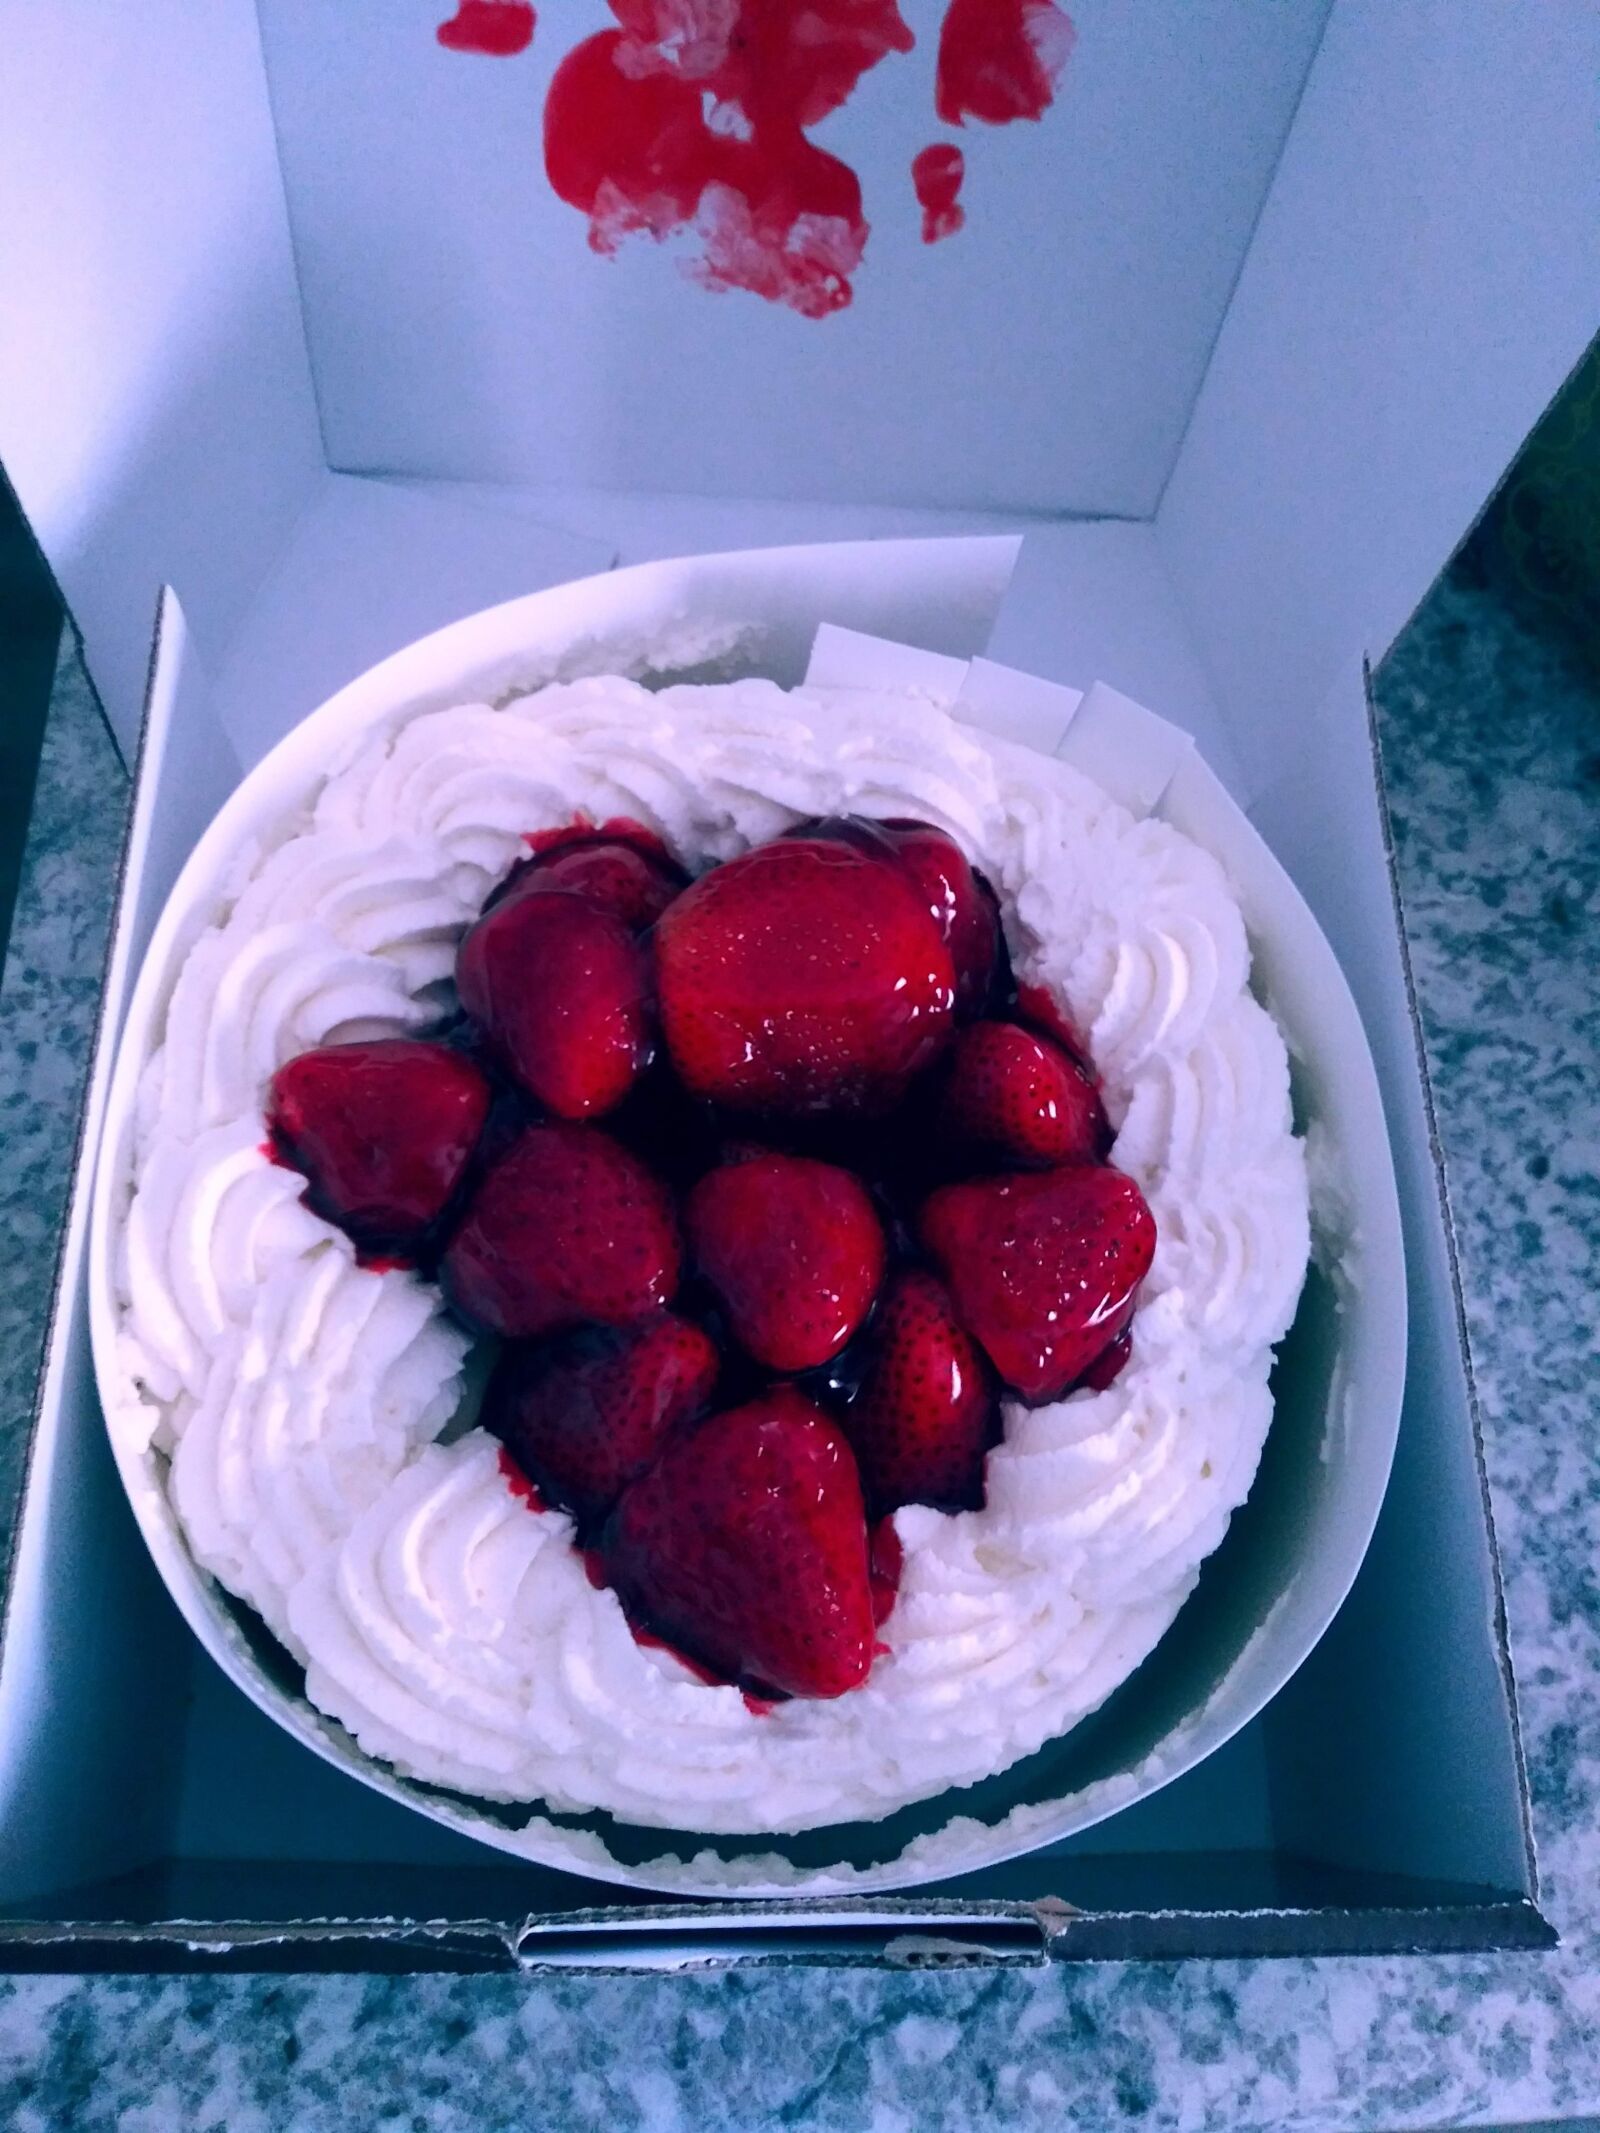 LG LM-Q720 sample photo. Strawberry cake, cheesecake, delicious photography